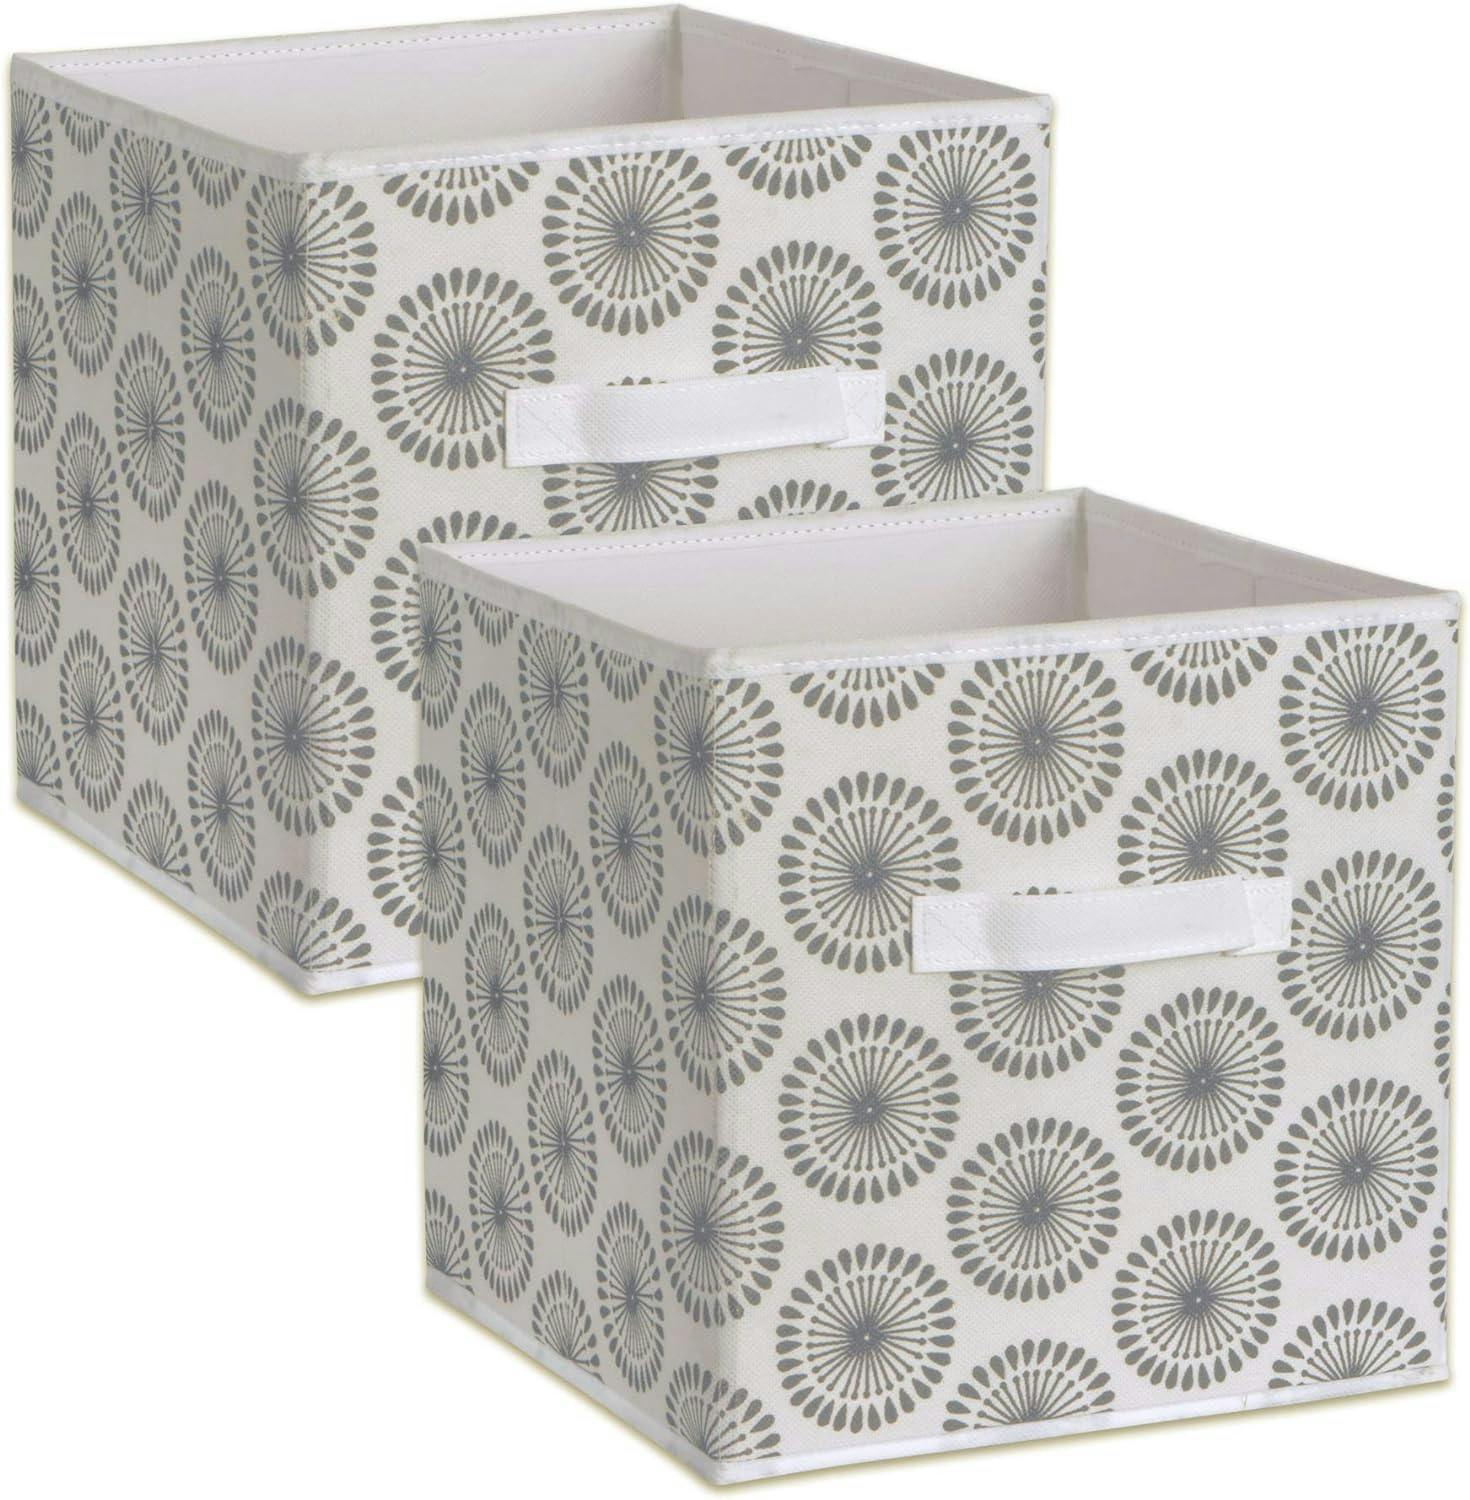 Foldable Gray Fabric Cube Storage Bin for Kids - Set of 2